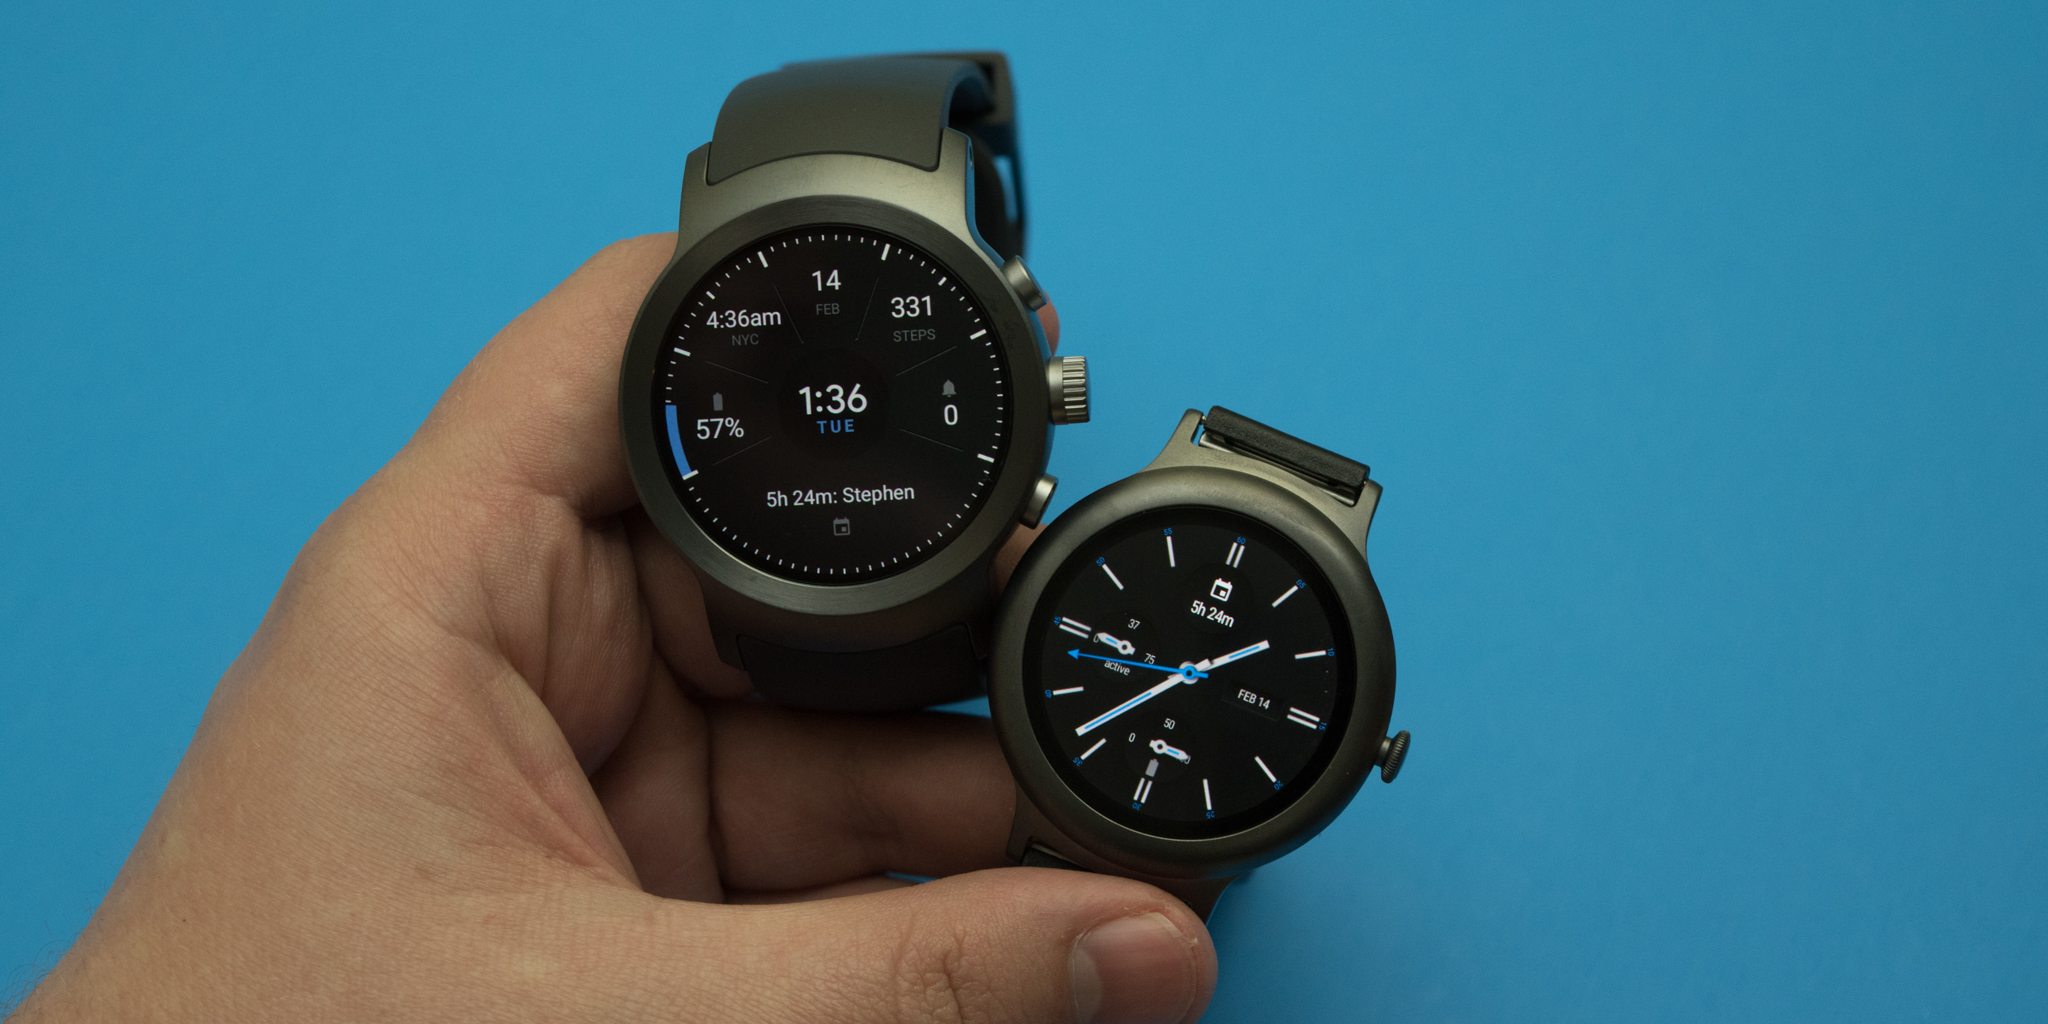 LG Watch W7 Hands-On: this hybrid is a mix of ambition and compromise -  YouTube